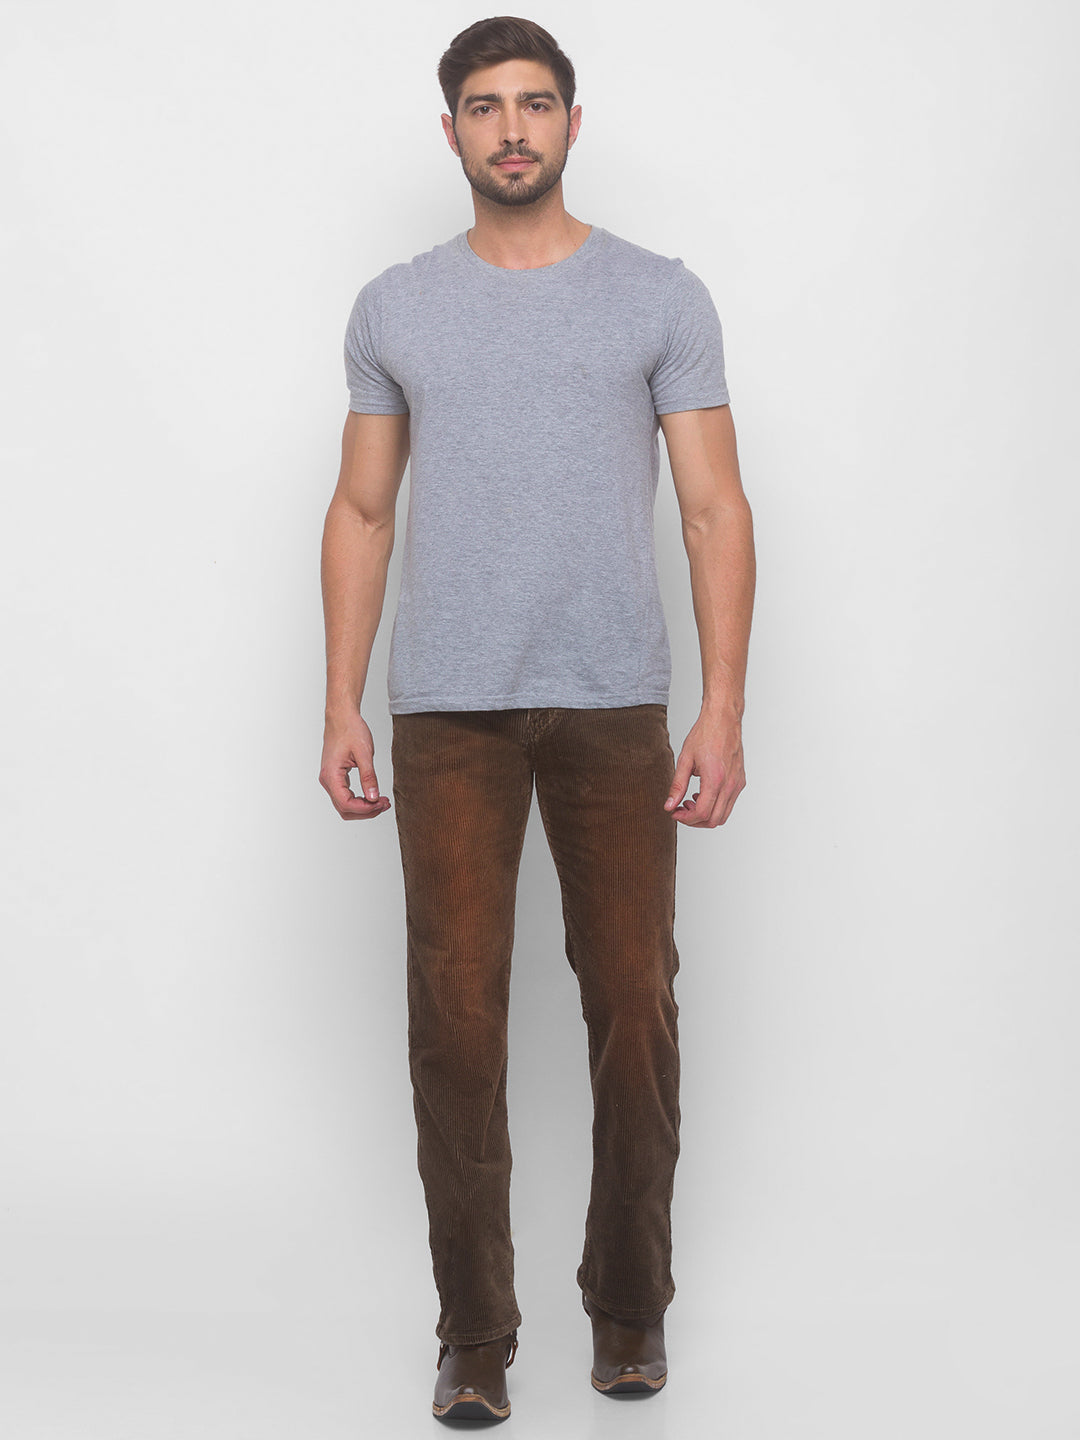 Chocolate Brown Bootcut Corduroy Trousers